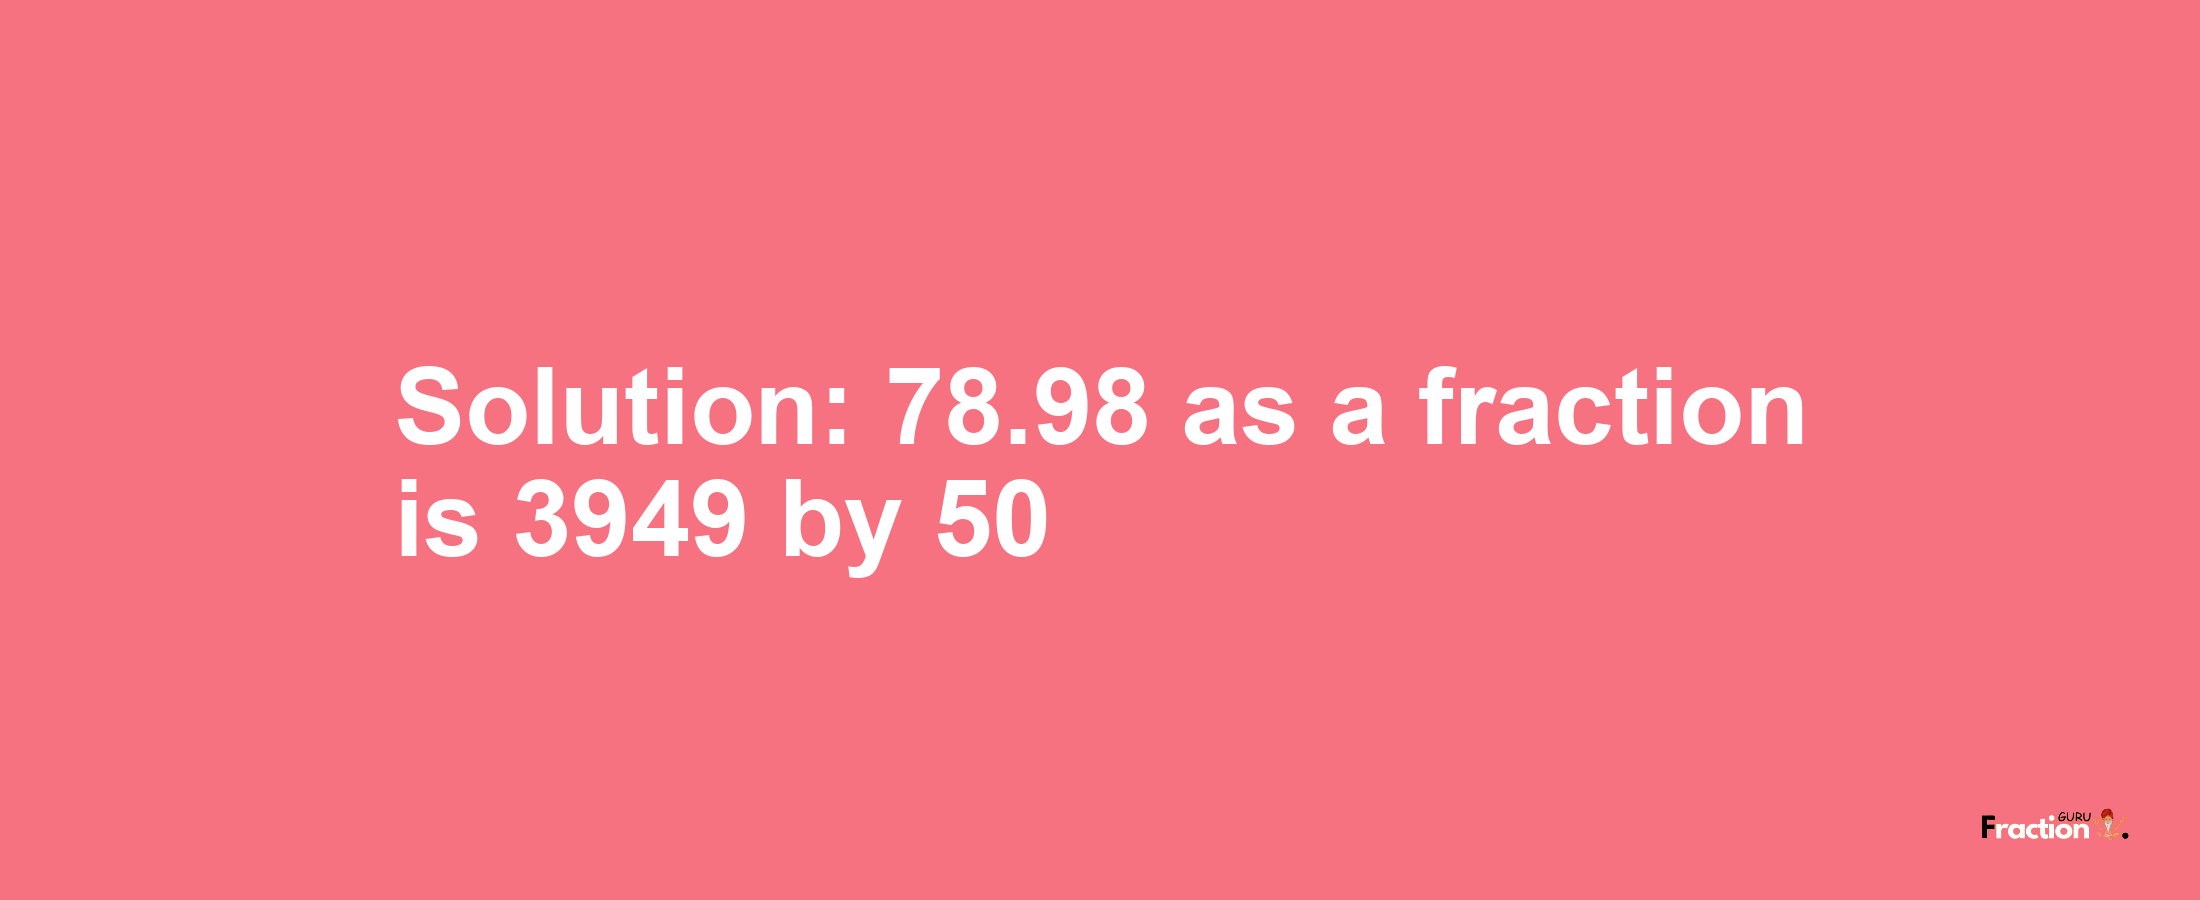 Solution:78.98 as a fraction is 3949/50